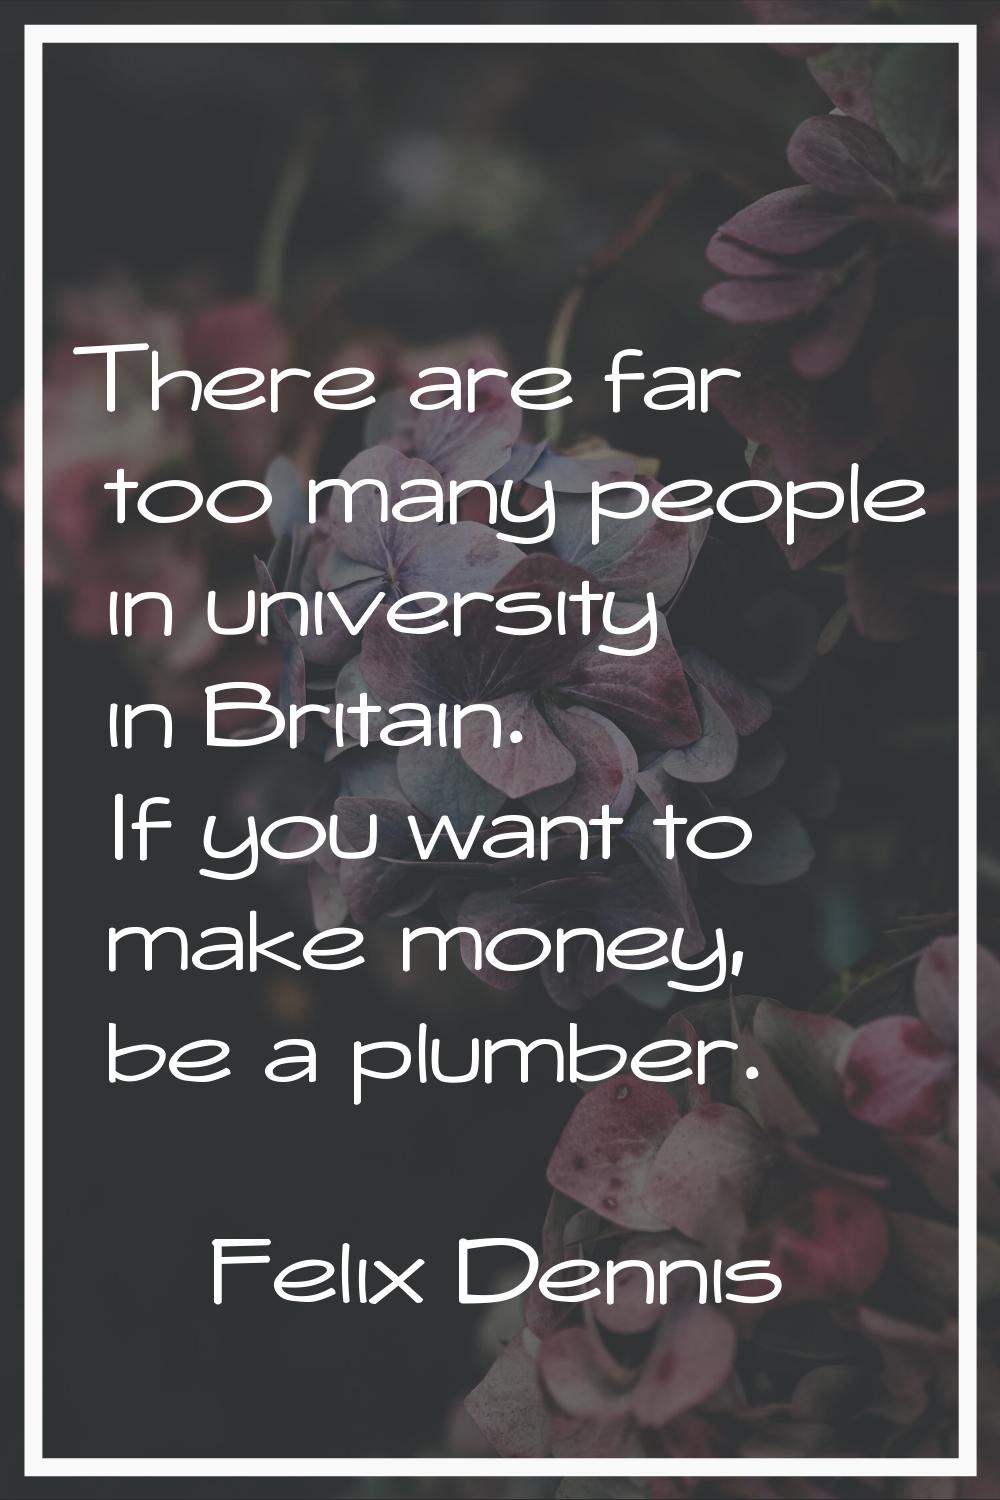 There are far too many people in university in Britain. If you want to make money, be a plumber.